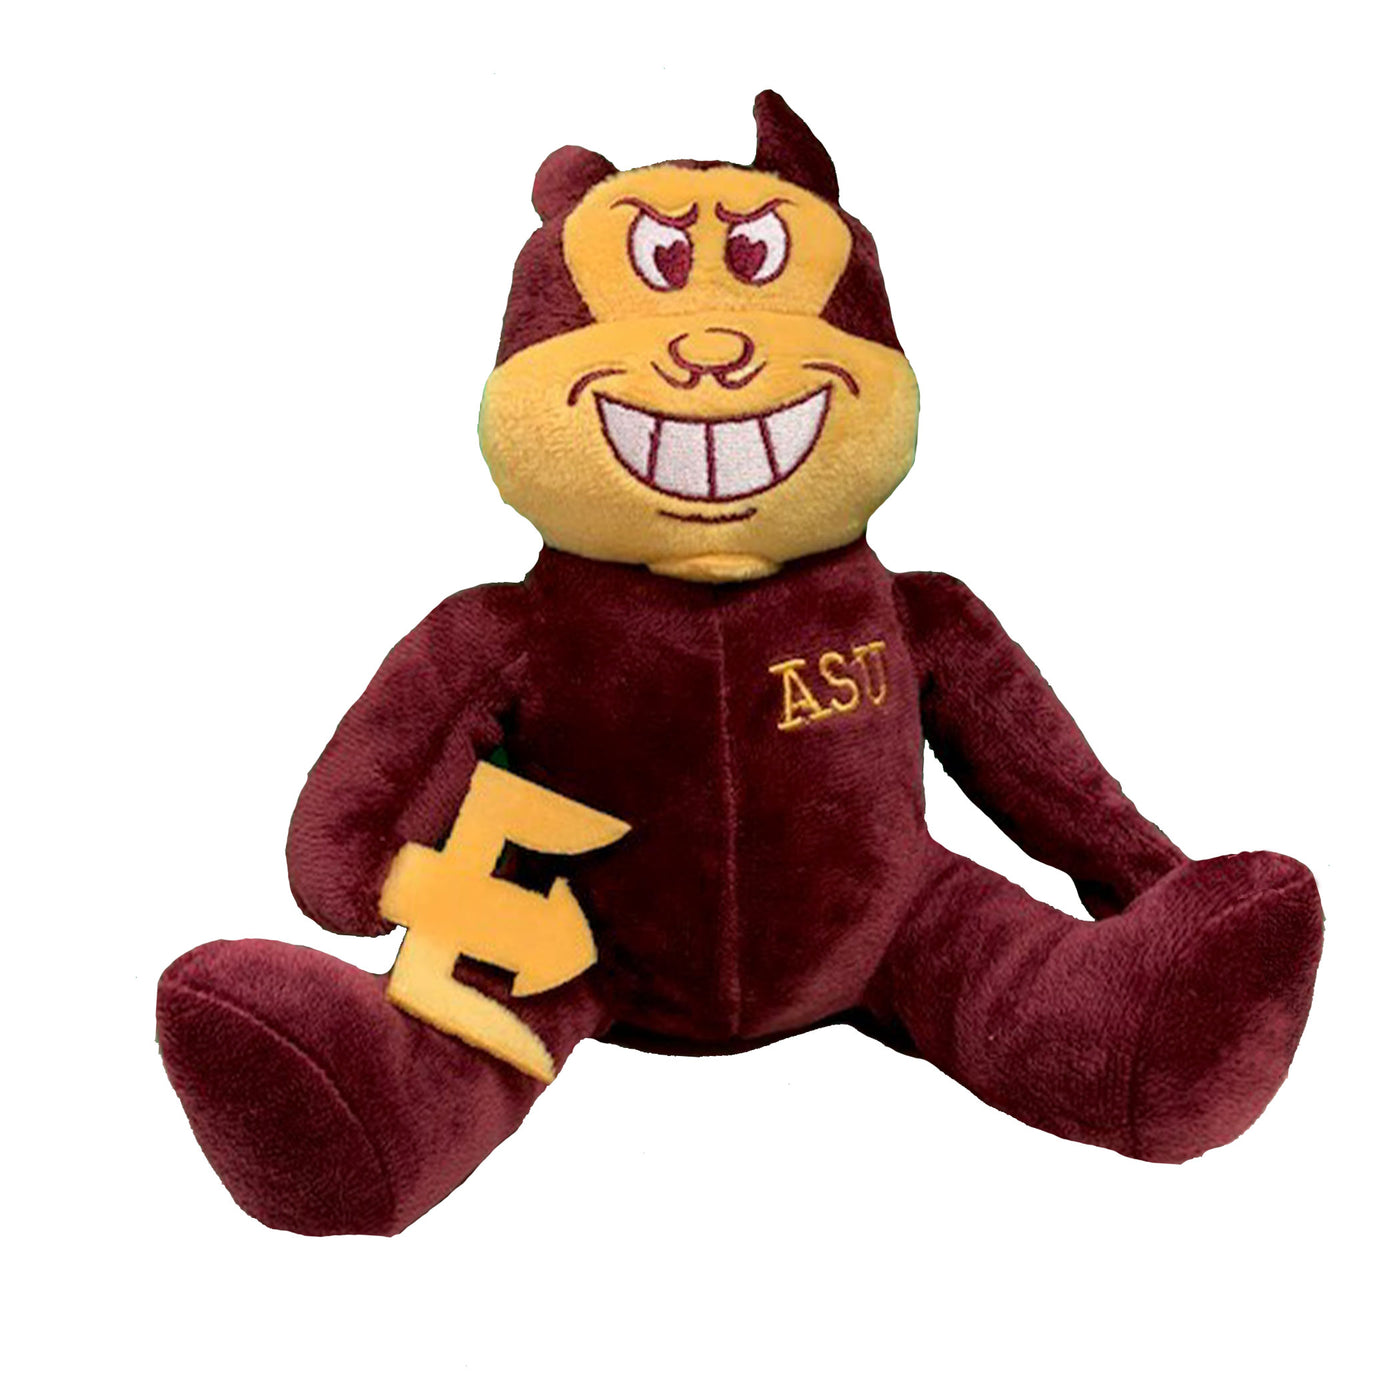 ASU sitting Sparky with soft maroon and gold fabric